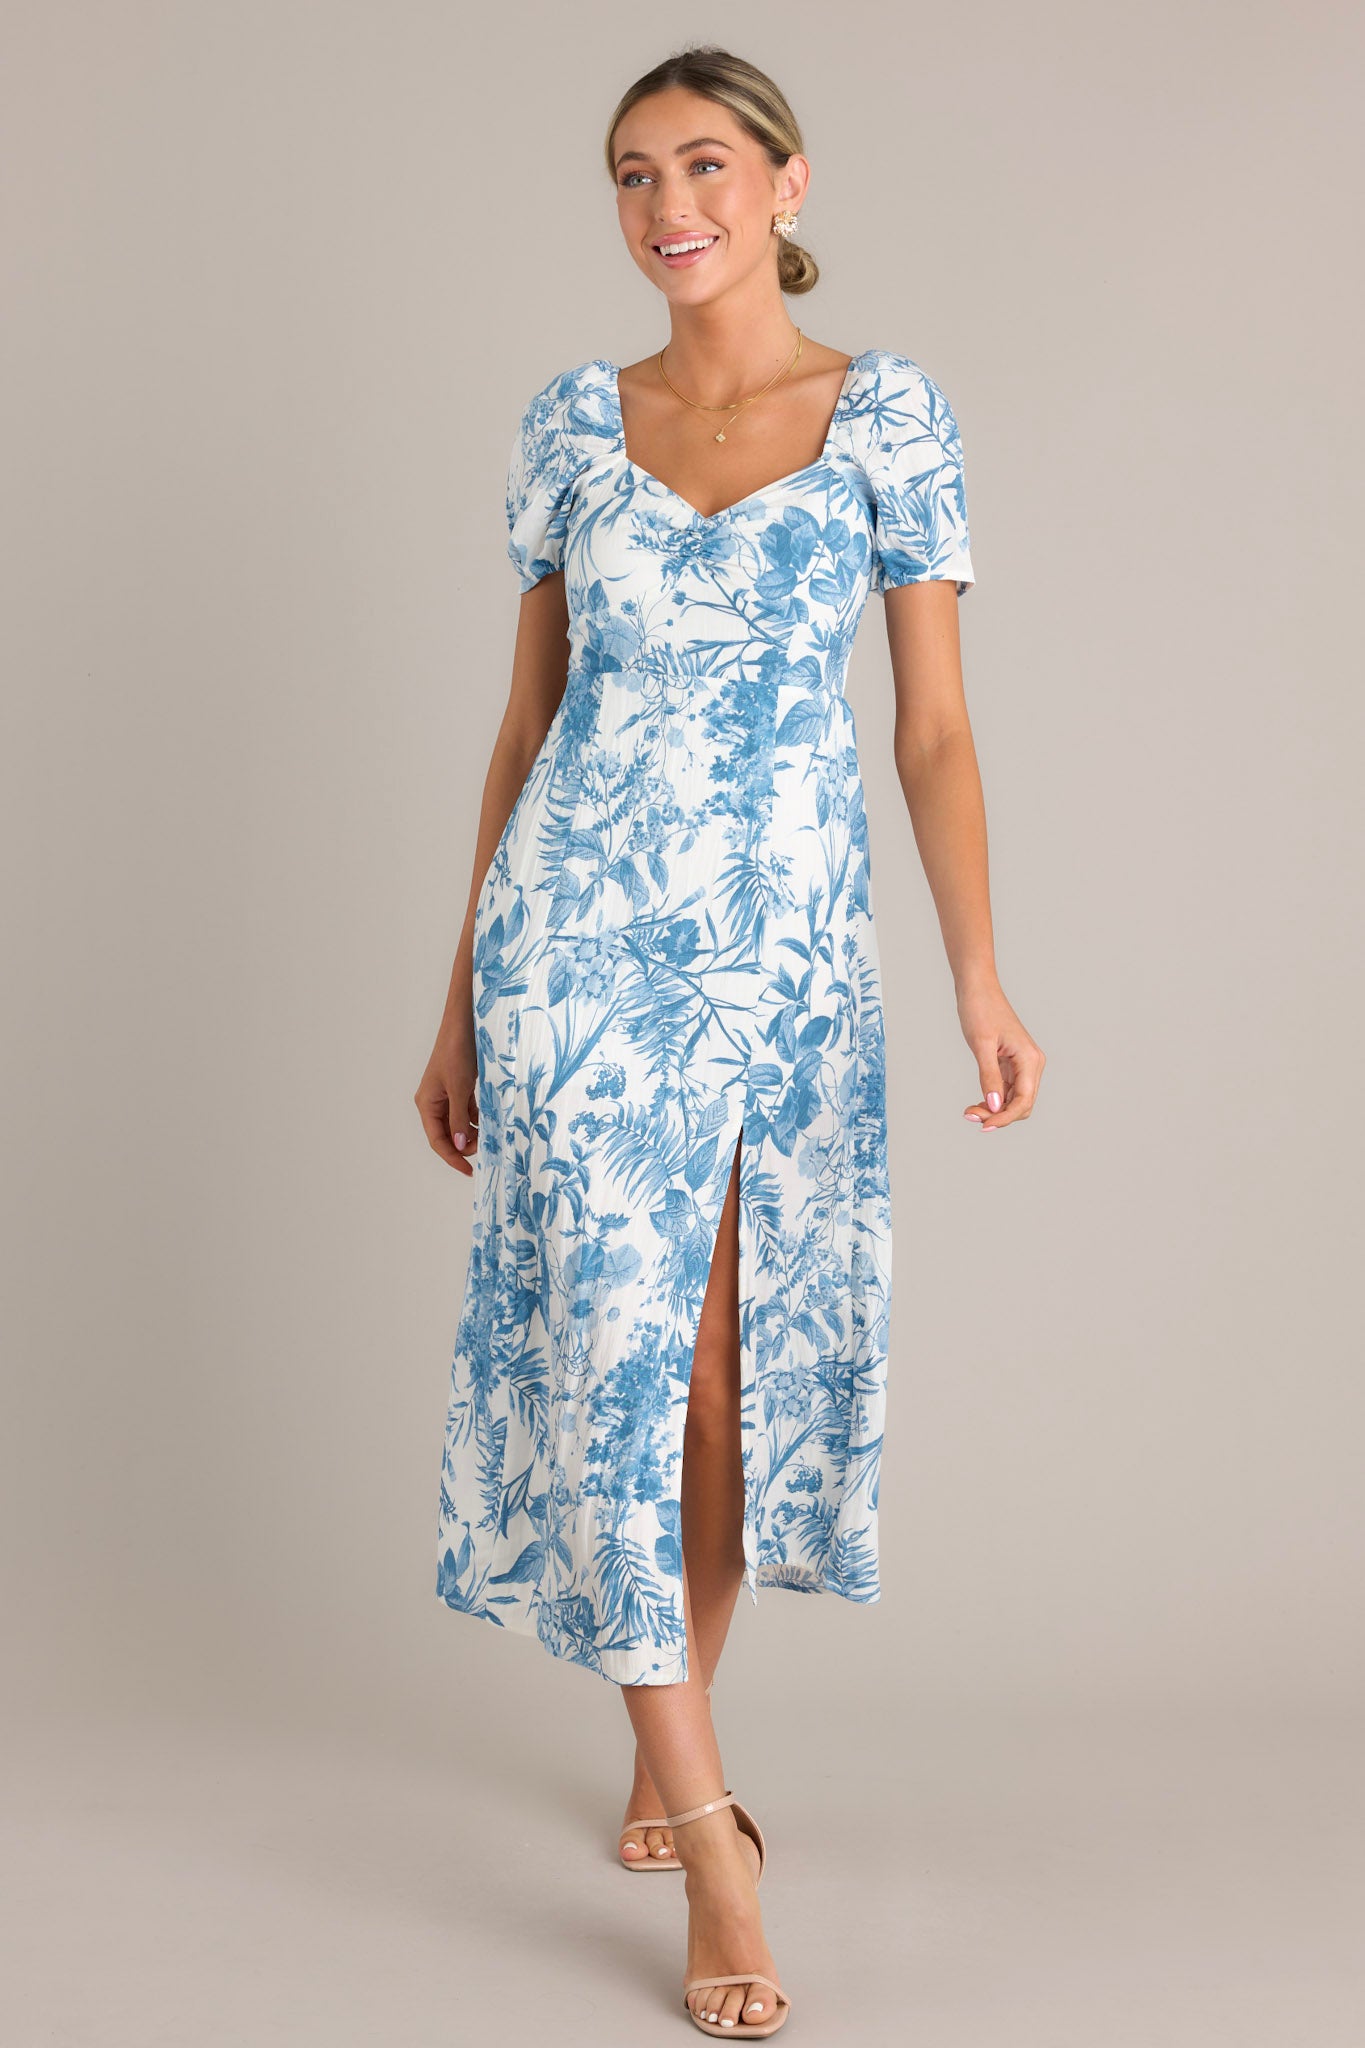 Elegant blue floral midi dress with short puff sleeves, a sweetheart neckline, a fitted bodice, a cinched waist, and a mid-length skirt with a front slit.